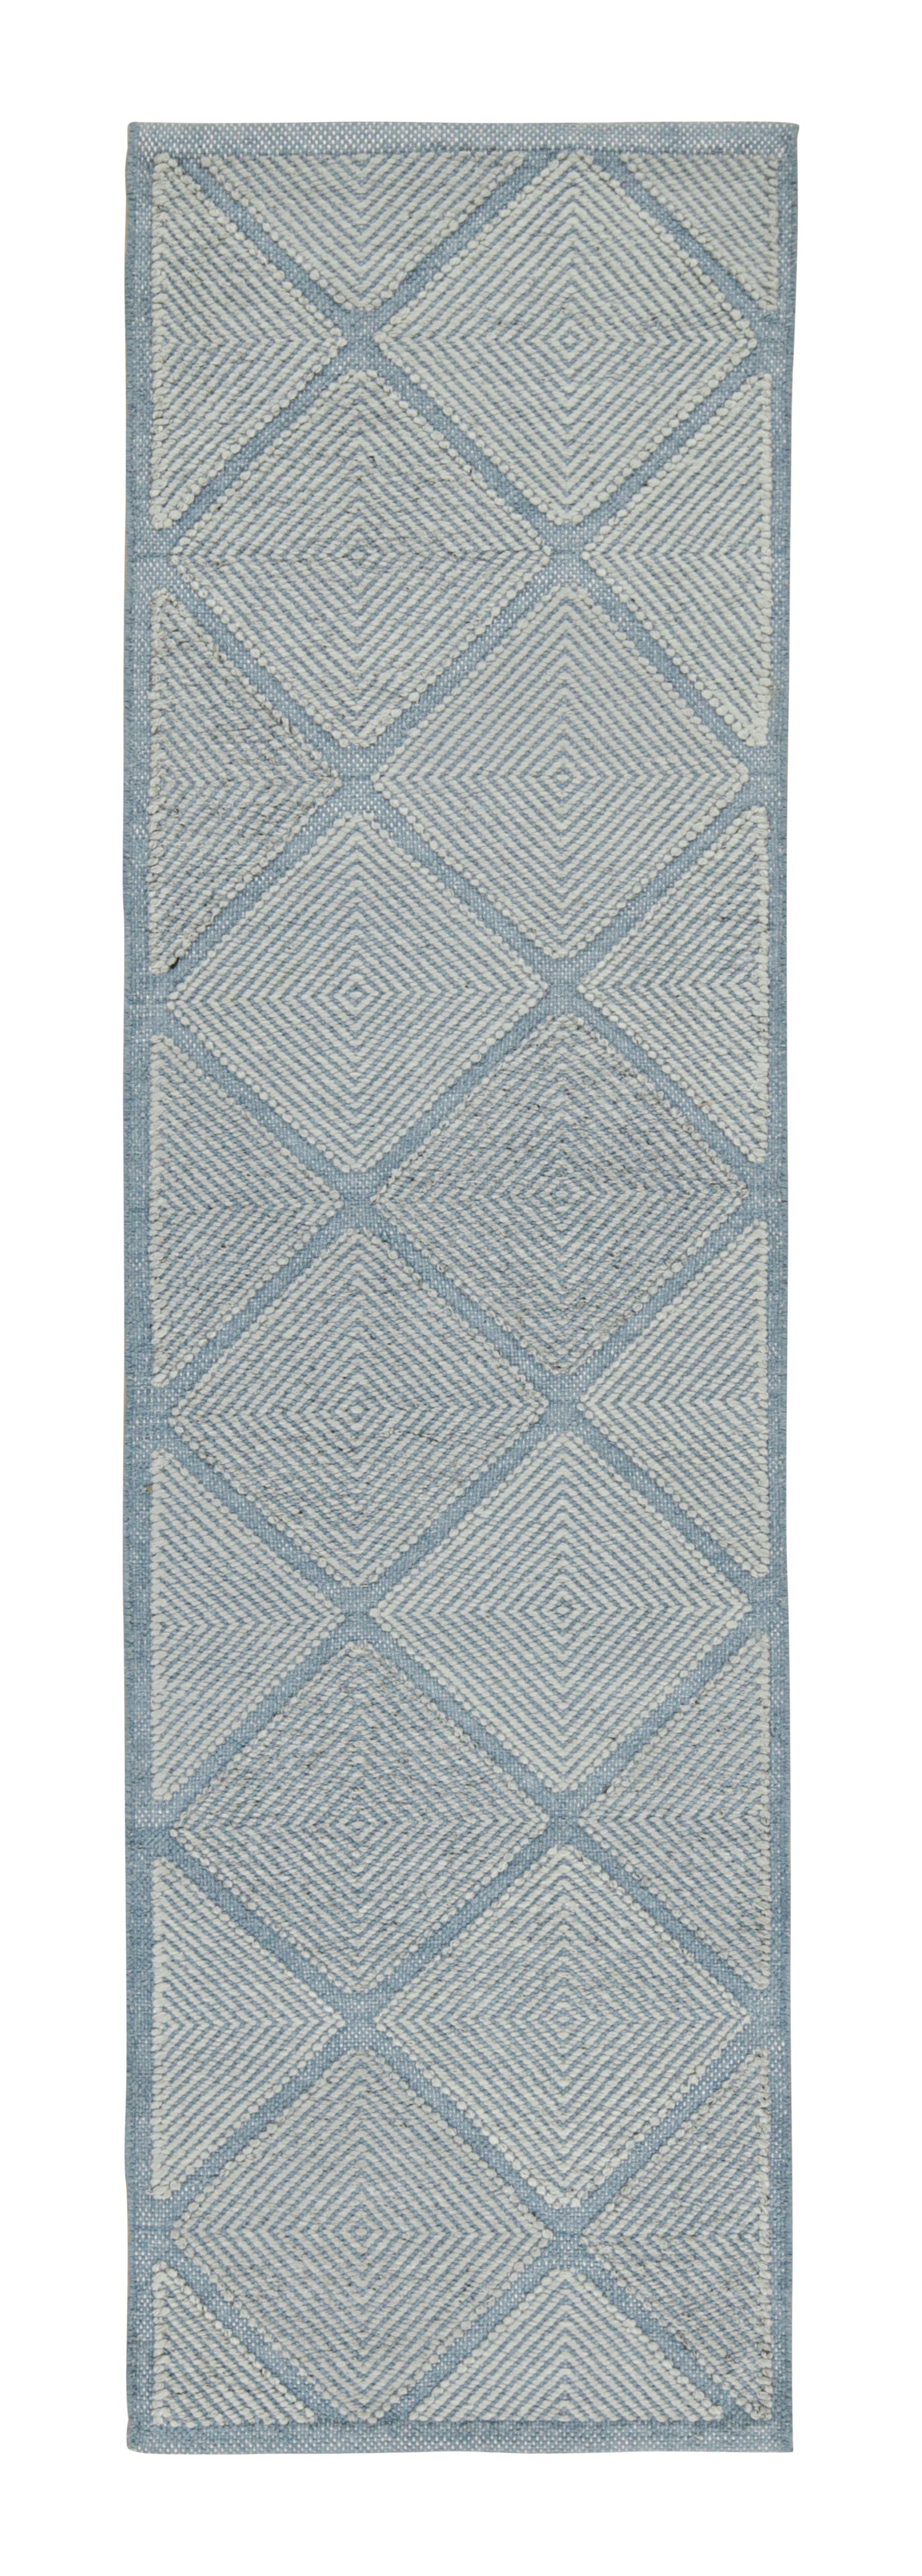 Rug & Kilim’s Scandinavian Style Kilim in Blue with Silver Diamond Patterns